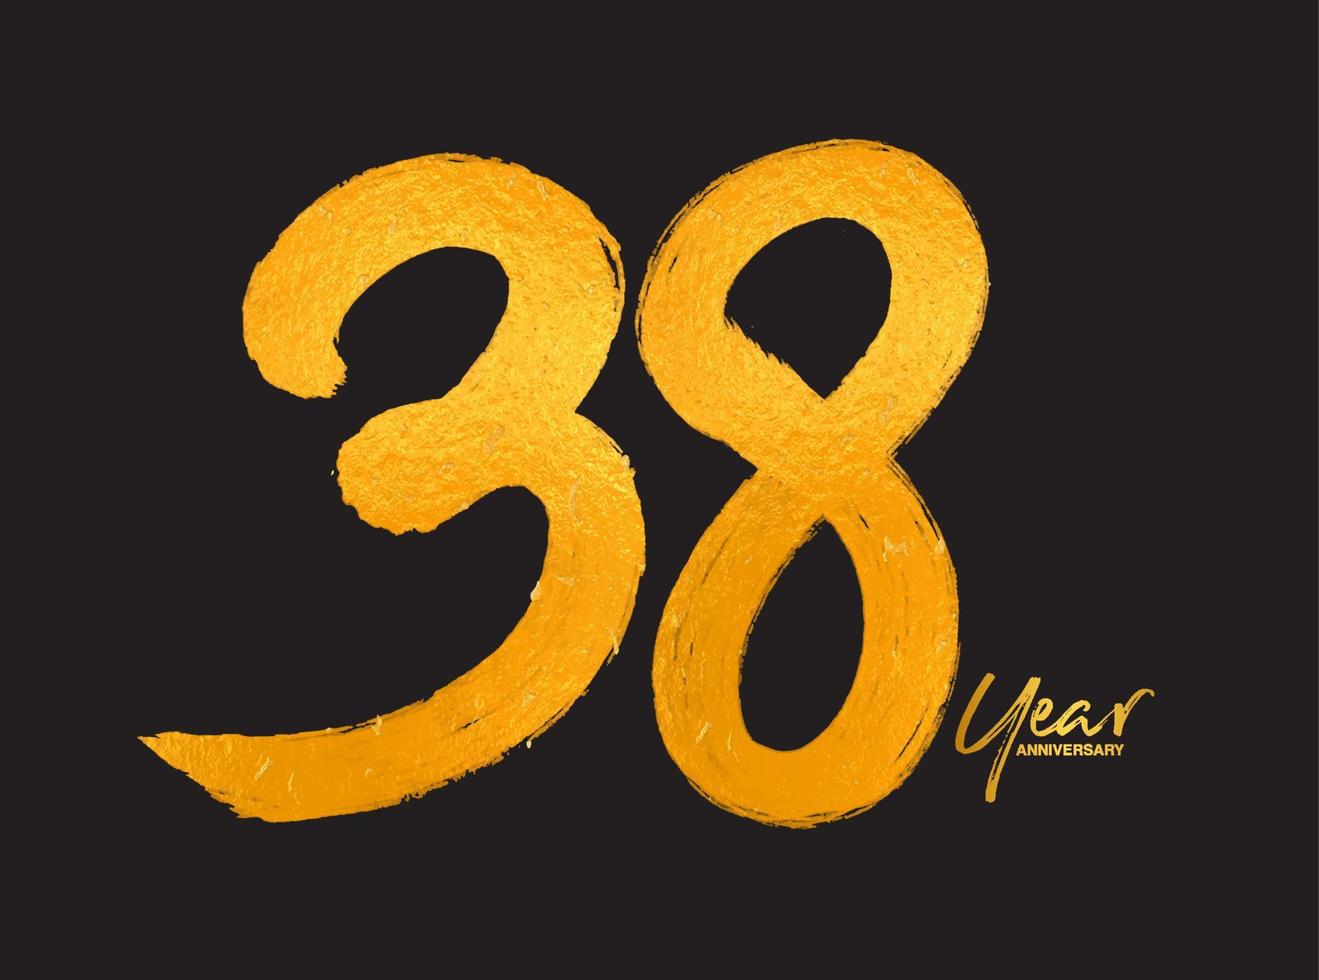 Gold 38 Years Anniversary Celebration Vector Template, 38 Years  logo design, 38th birthday, Gold Lettering Numbers brush drawing hand drawn sketch, number logo design vector illustration